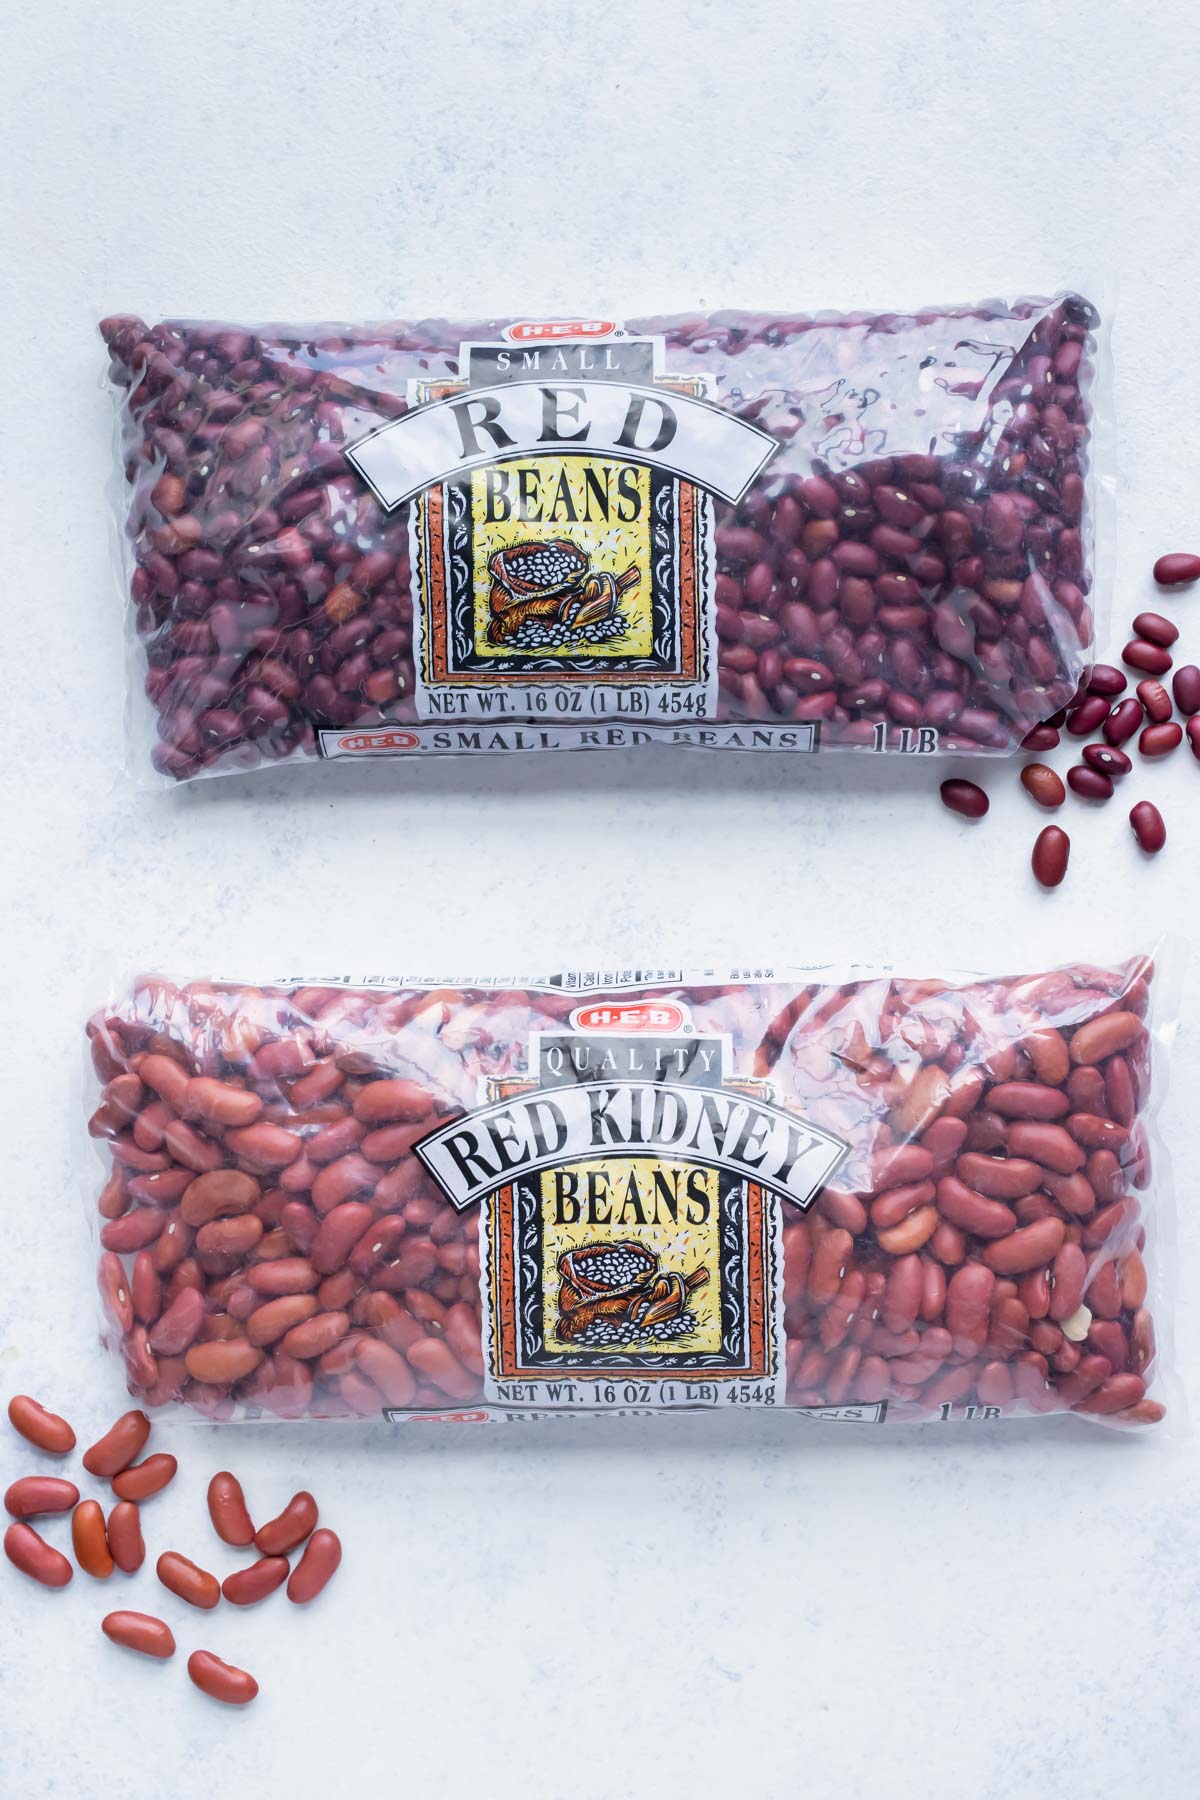 Red beans and kidney beans are shown.